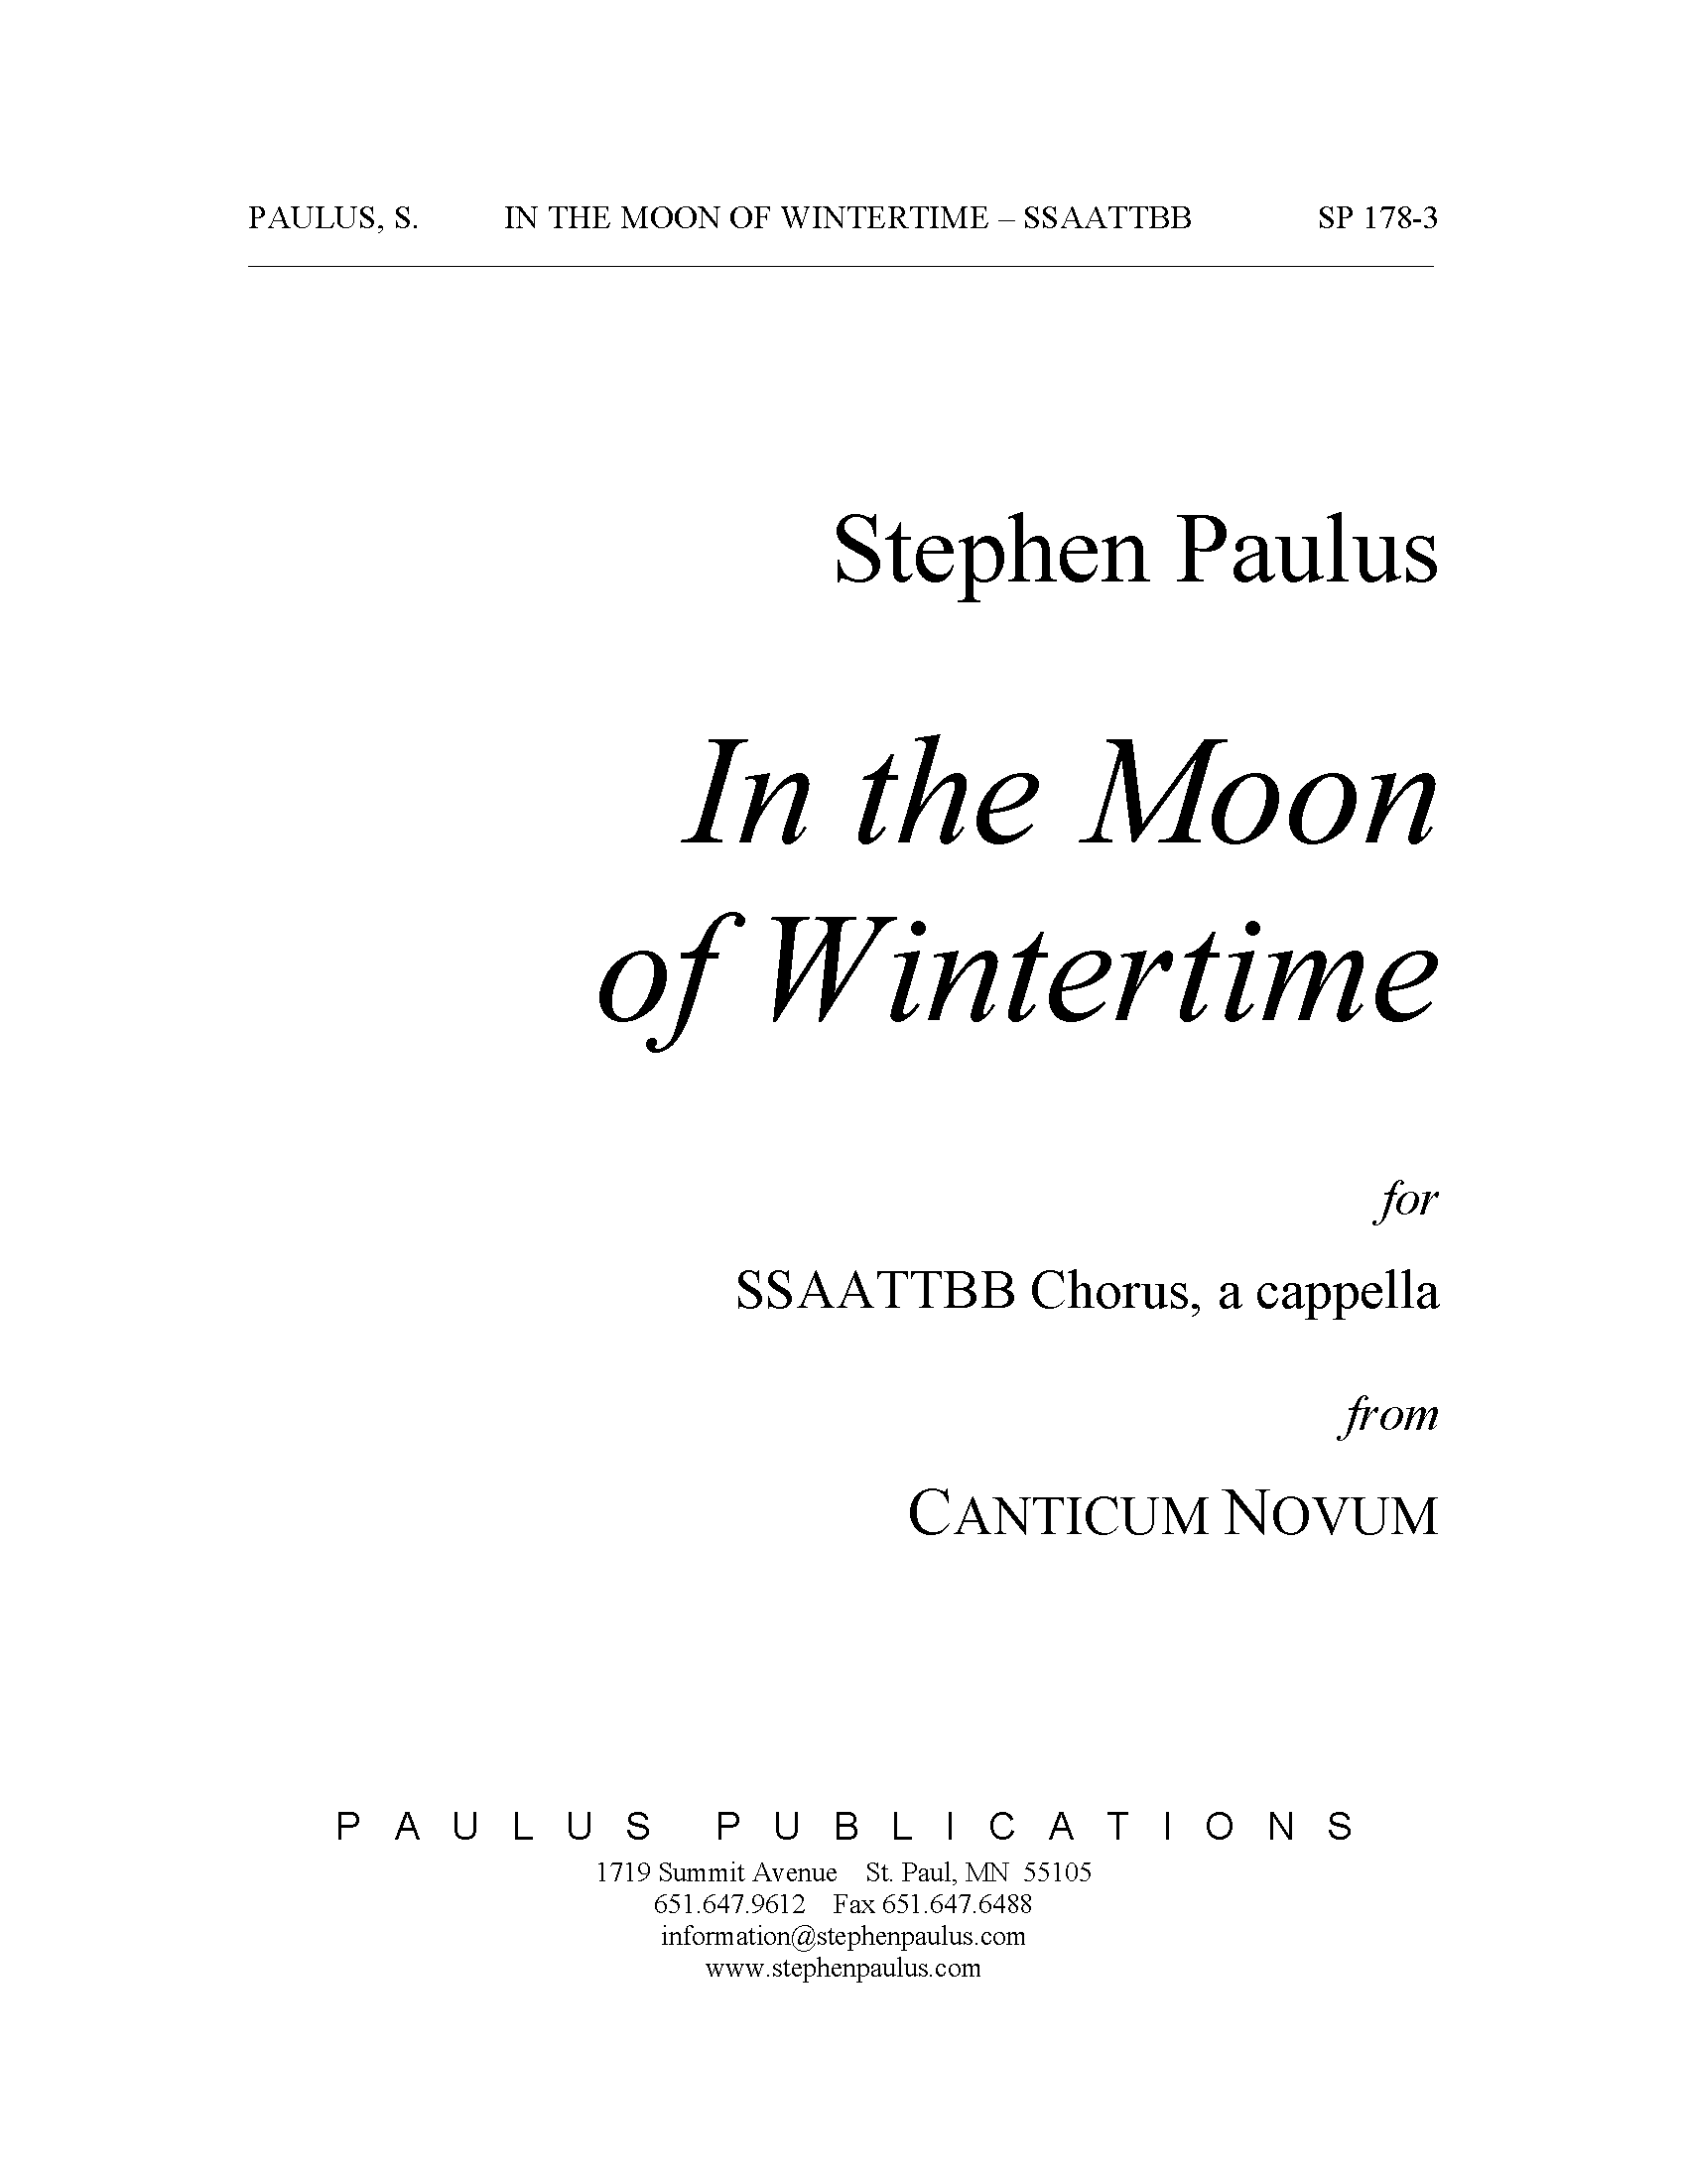 In the Moon of Wintertime (from Canticum Novum) for SSAATTBB, a cappella